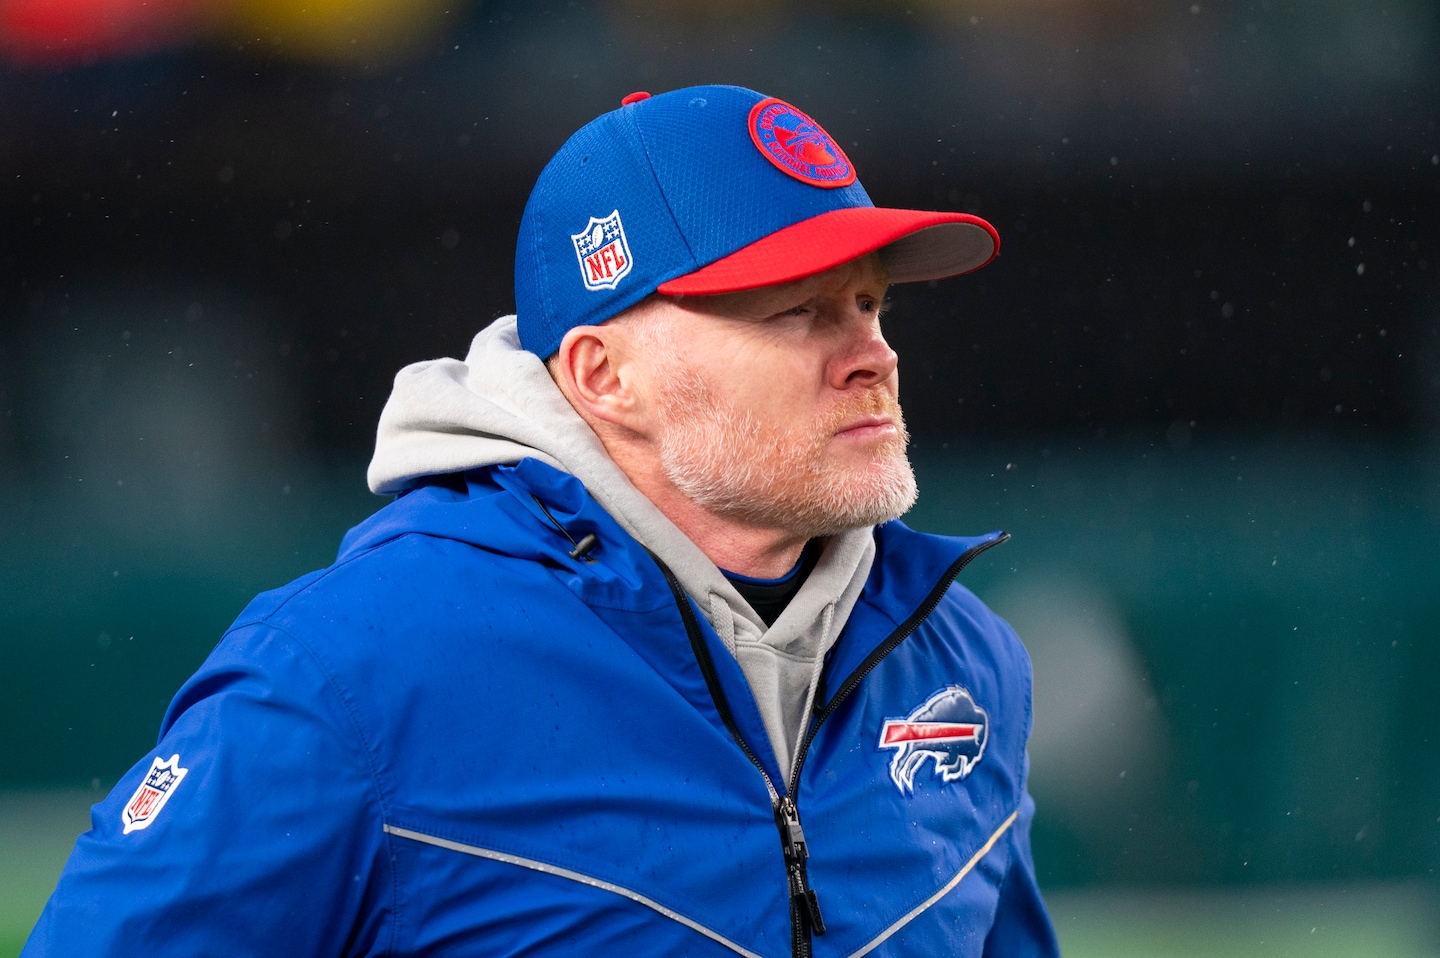 Sean McDermott says he regrets making 9/11 reference in team meeting